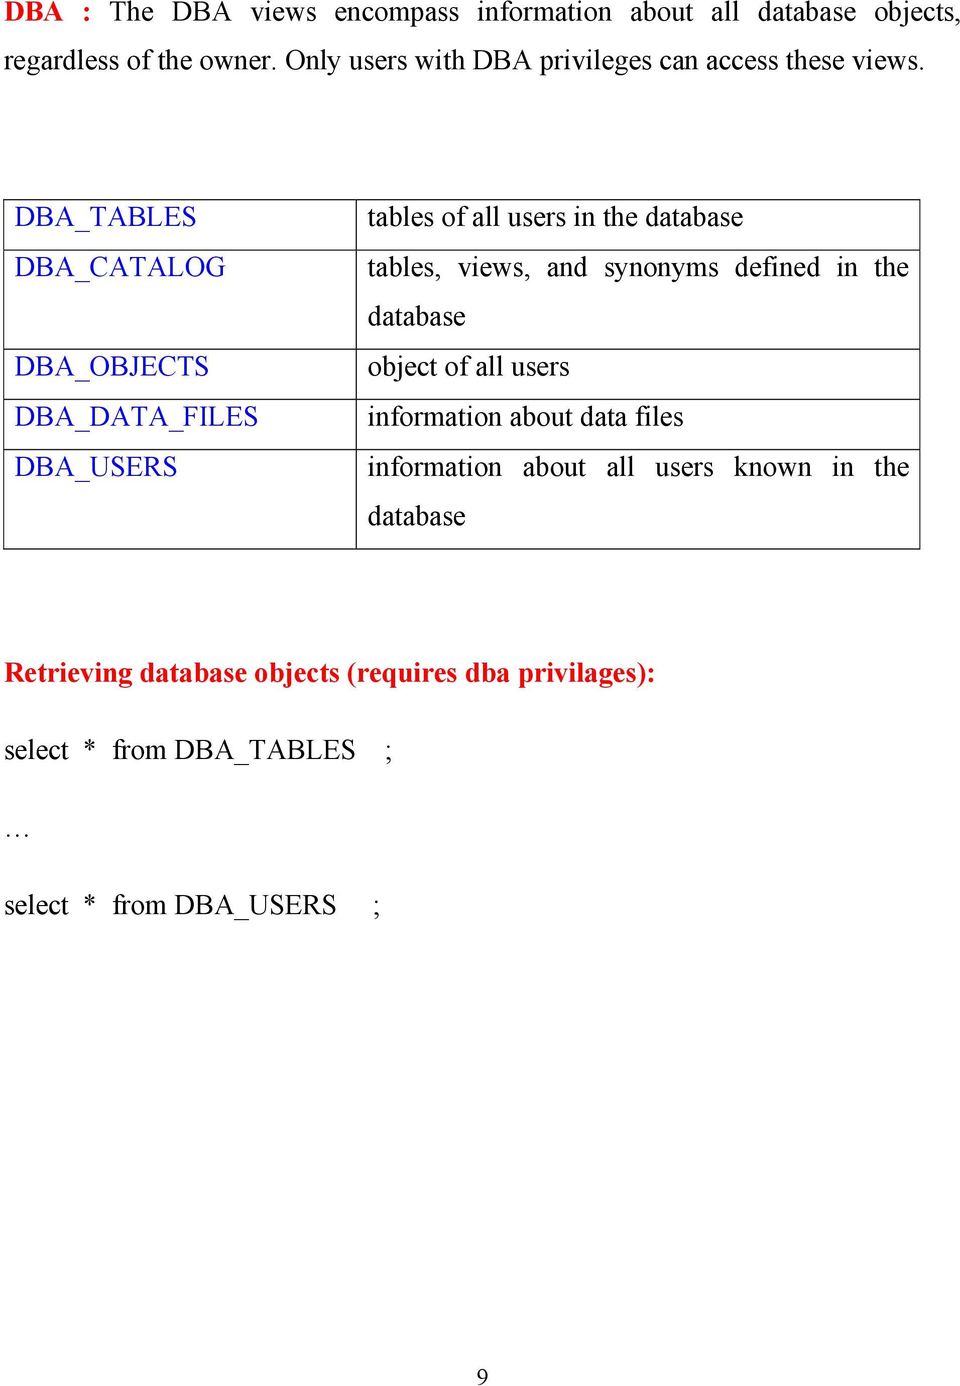 DBA_S DBA_CATALOG DBA_OBJECTS DBA_DATA_FILES DBA_USERS tables of all users in the database tables, views, and synonyms